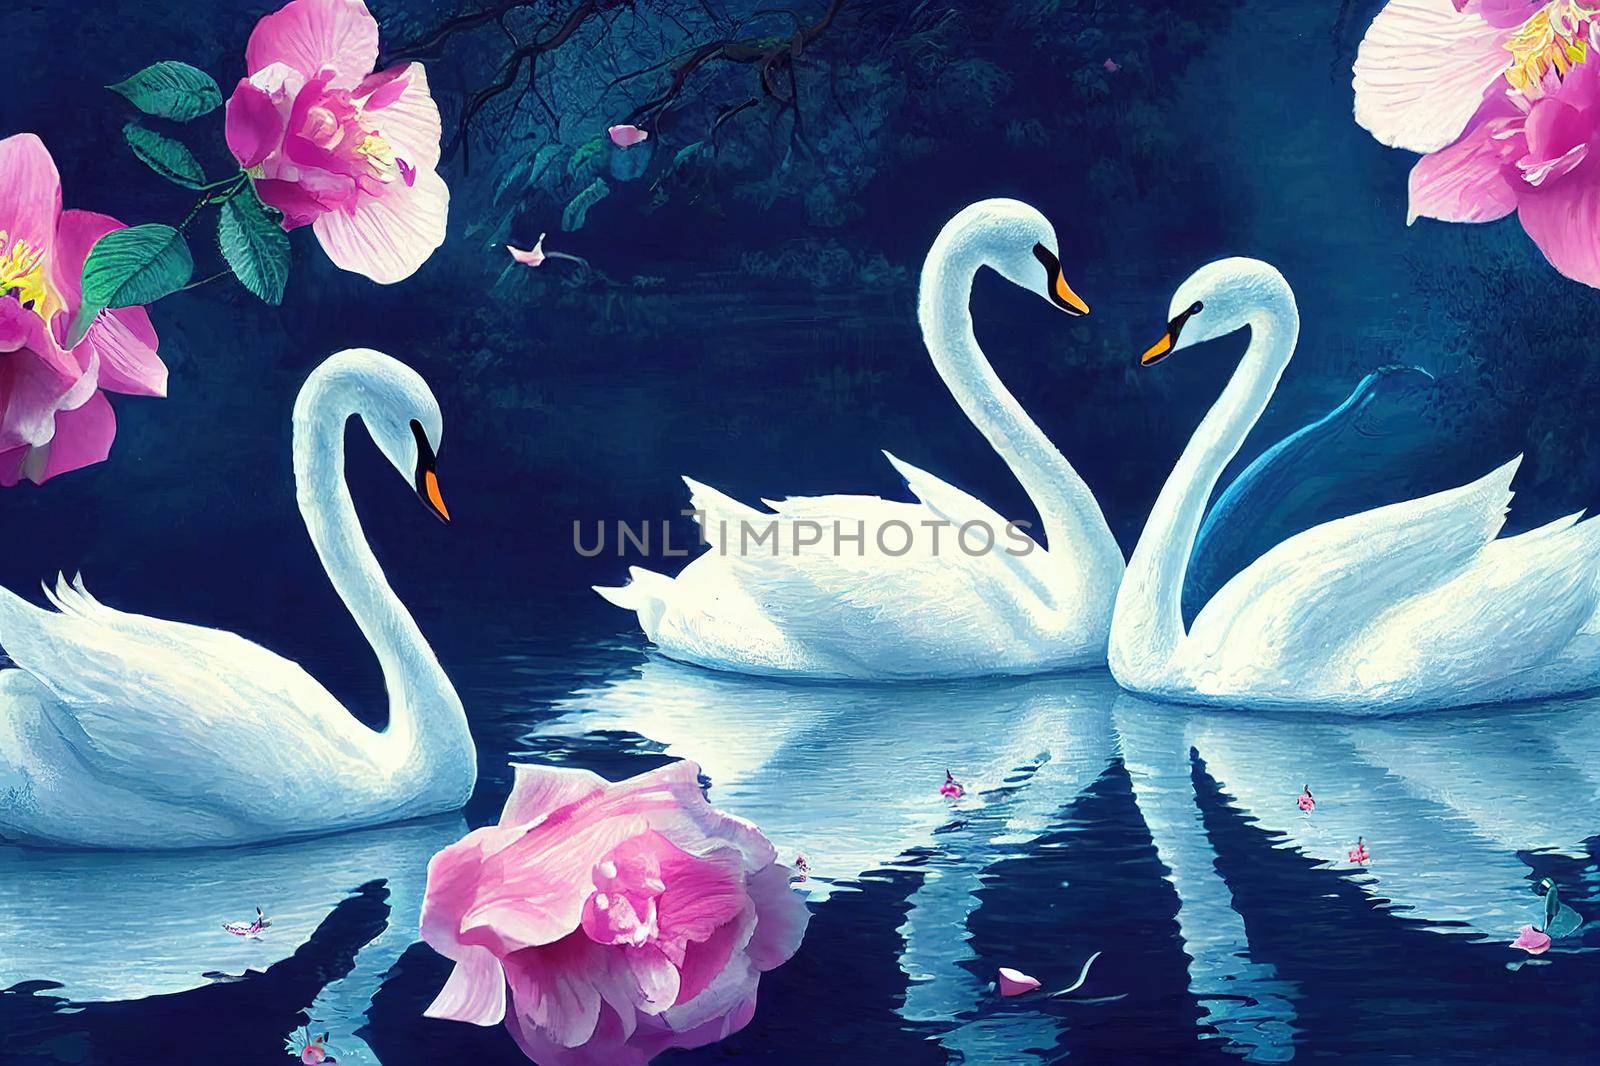 Two white swans couple swimming in lake, fantasy magical enchanted fairy tale landscape with elegant birds in love, fairytale blooming pink rose flower garden on mysterious blue background in night